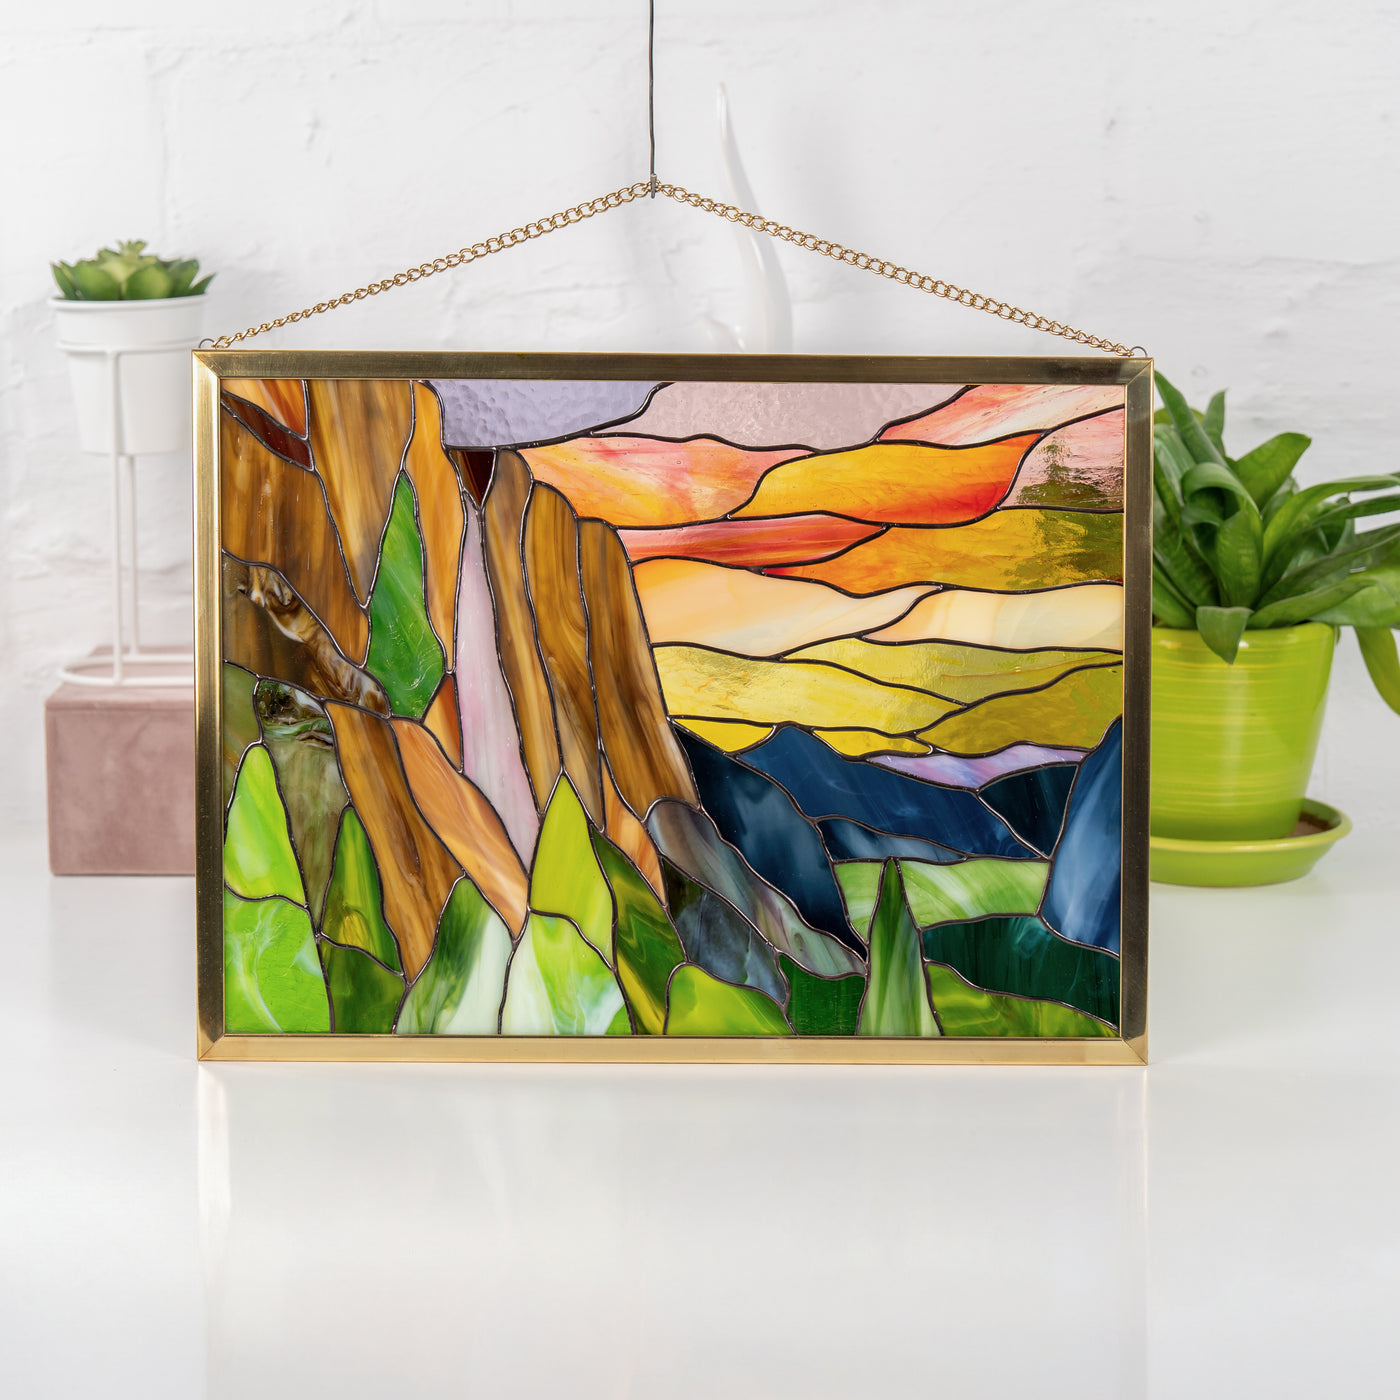 golden framed panel made of stained glass